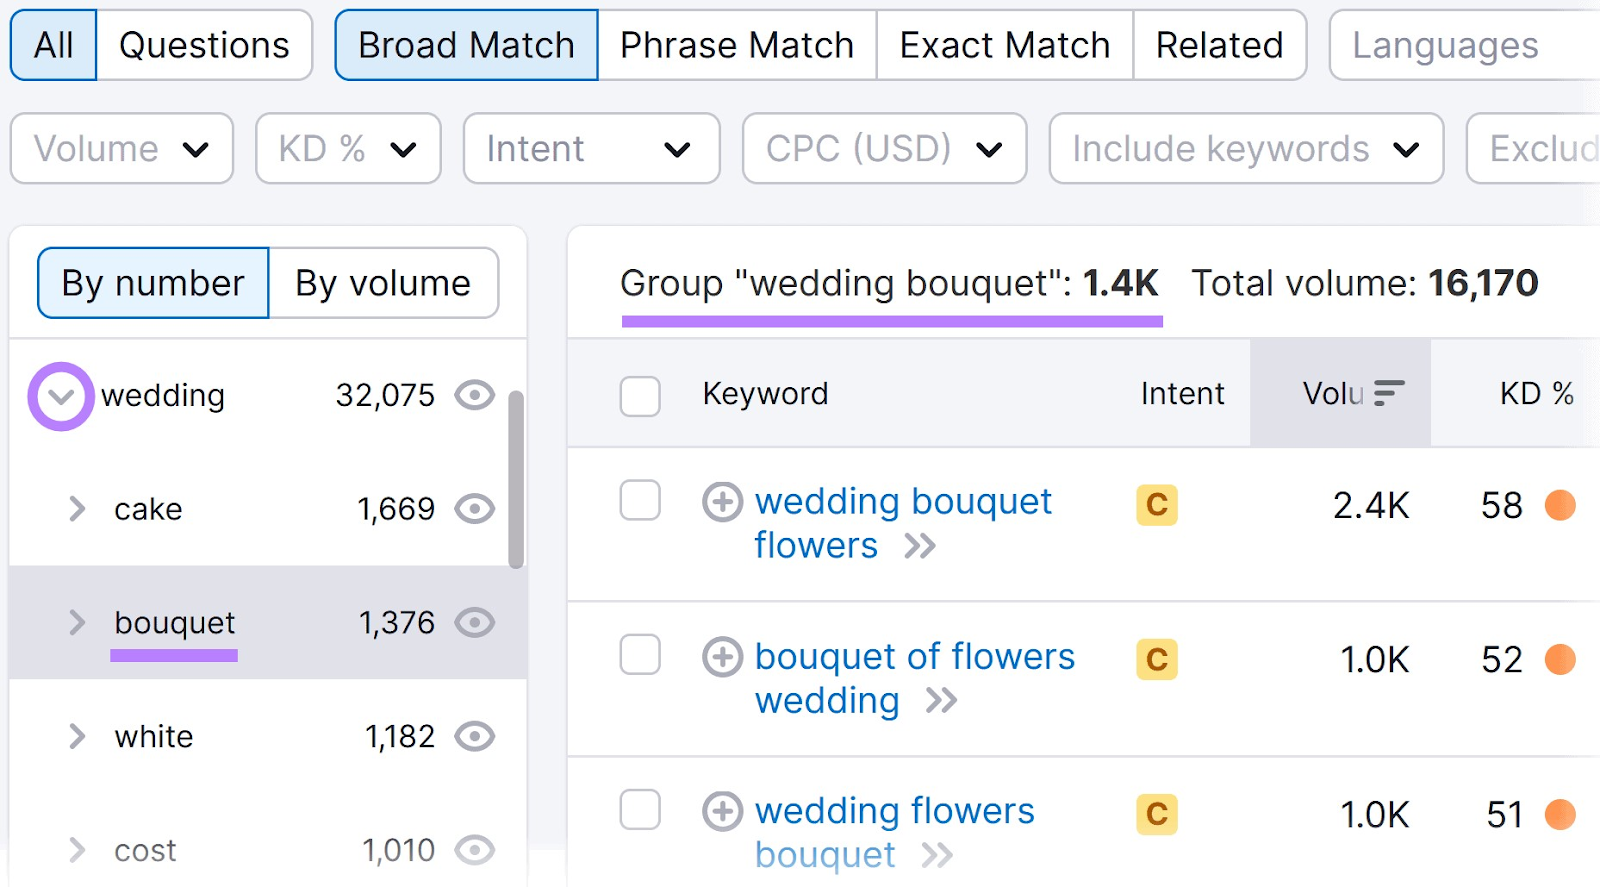 Filtering results by "wedding" group and "bouquet" subgroup